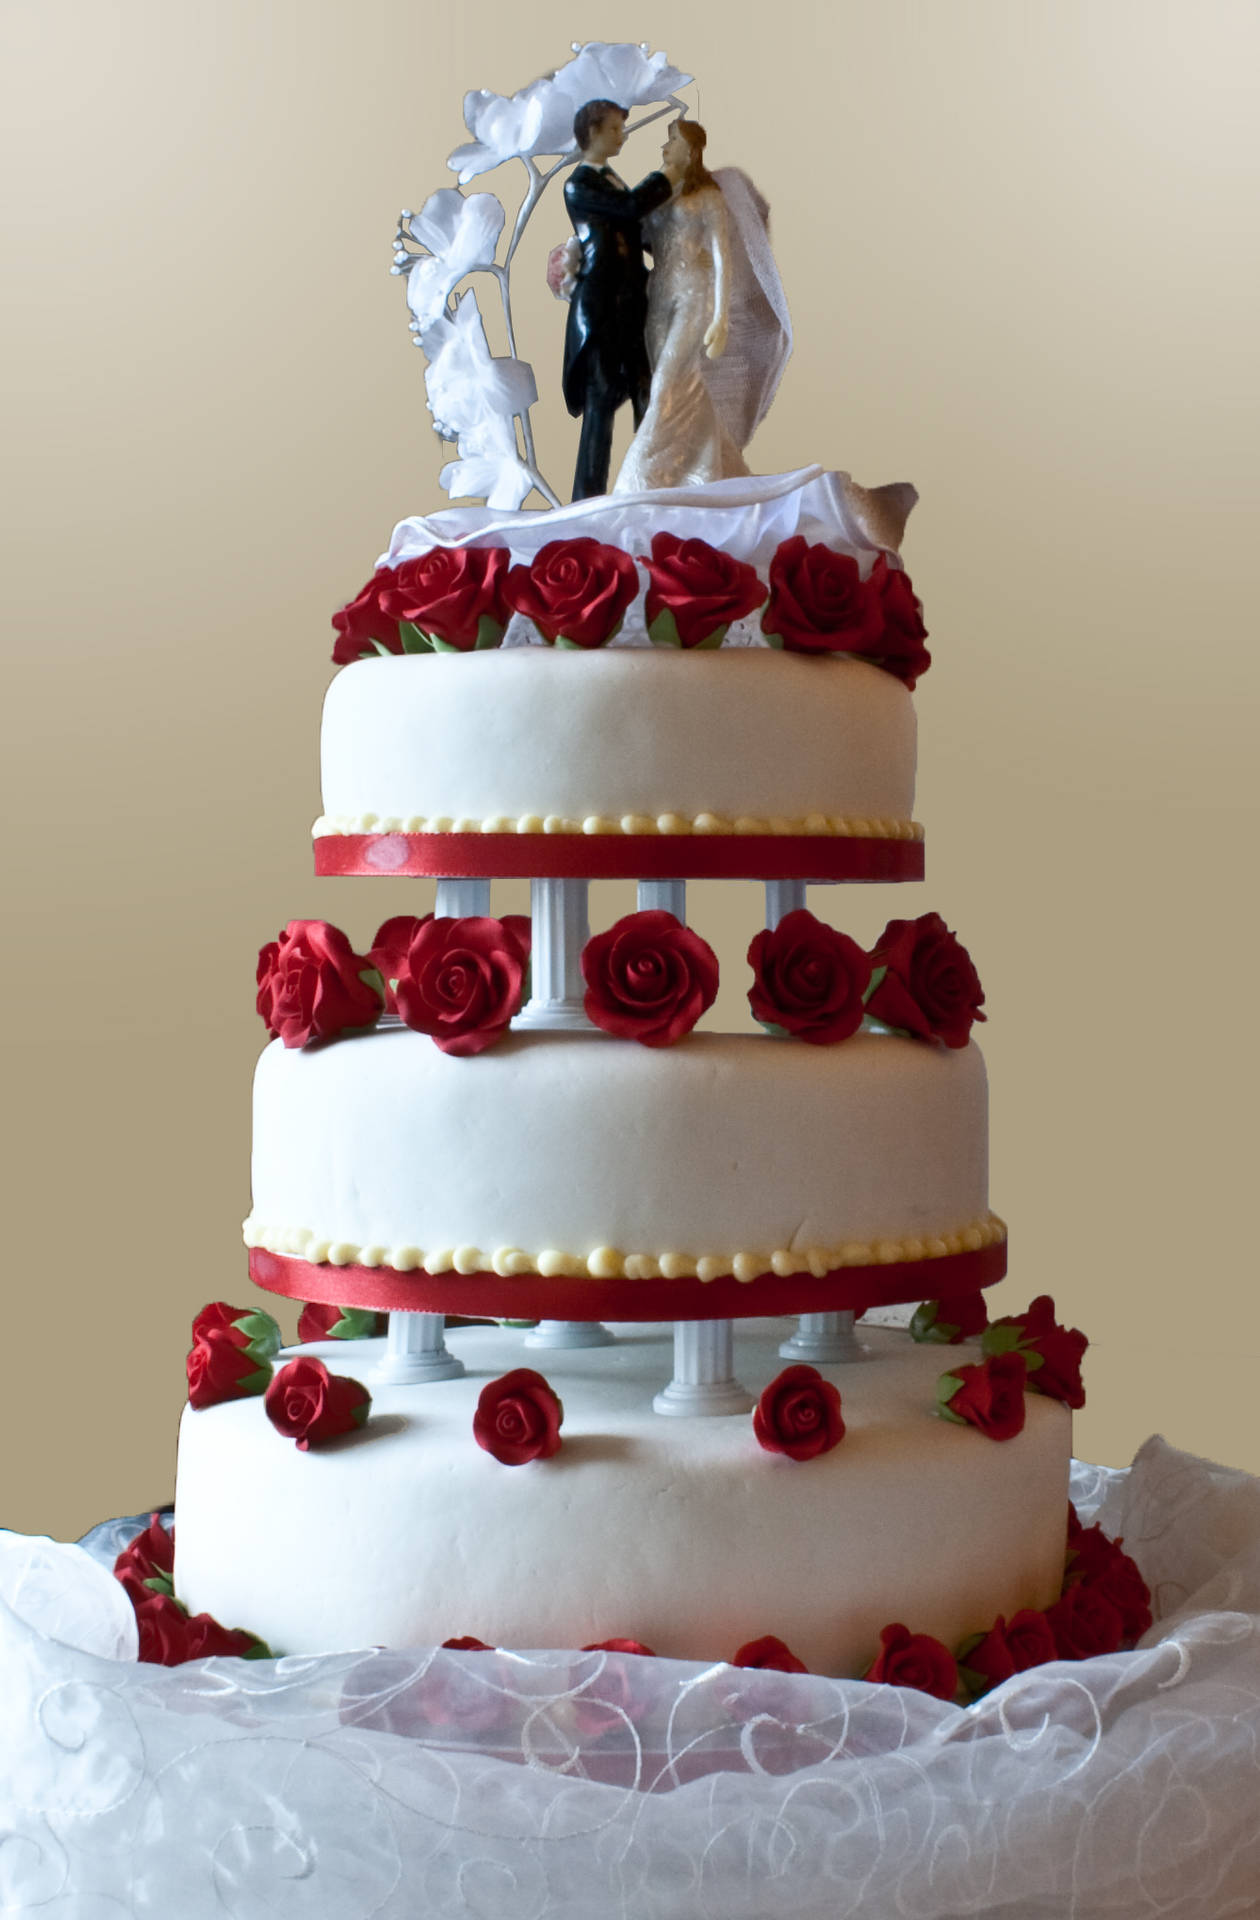 Bride And Groom Topped Wedding Cake Wallpaper